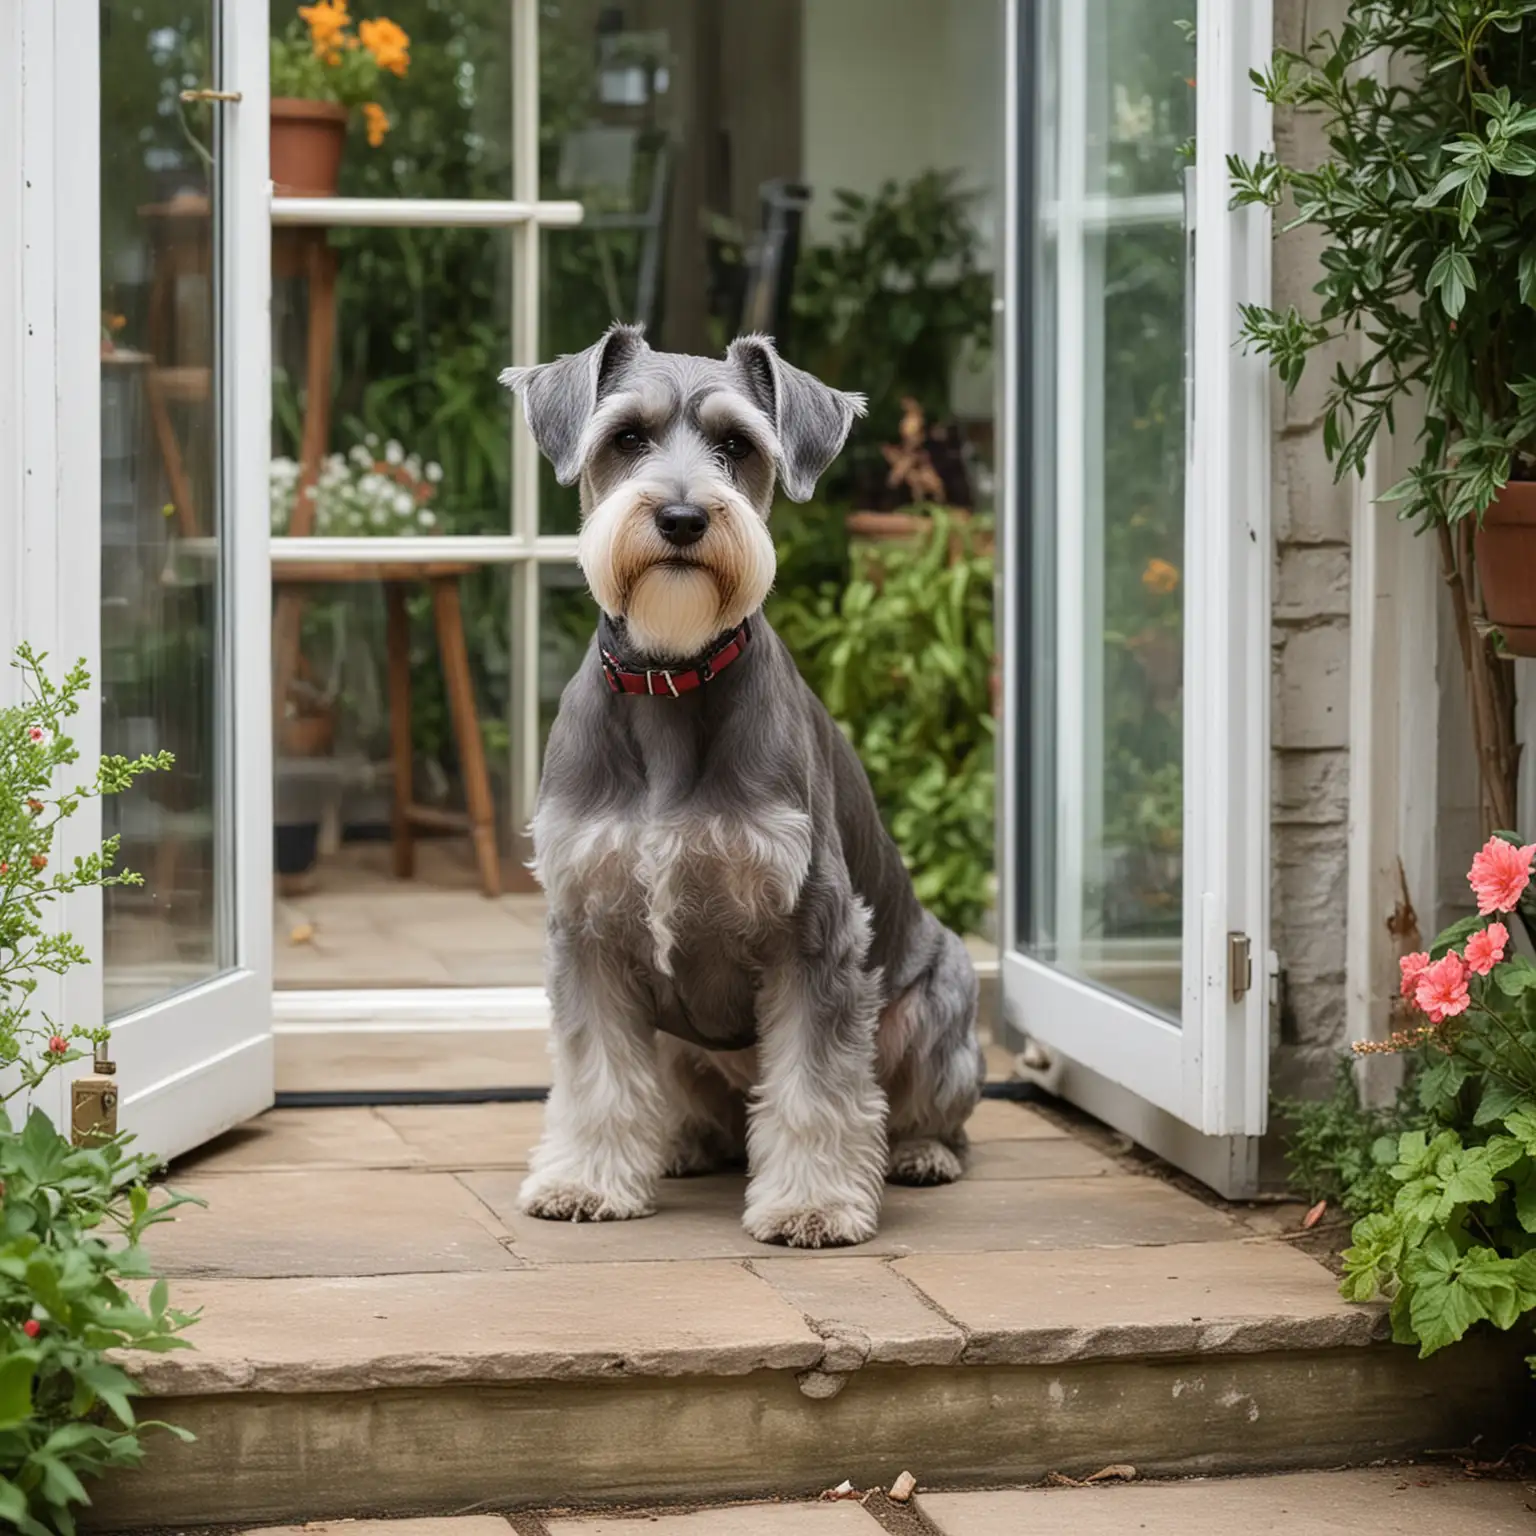 image of a cute Miniature Schnauzer  have the dog infront of french doors leading to a garden,, and the dog posing for a picture